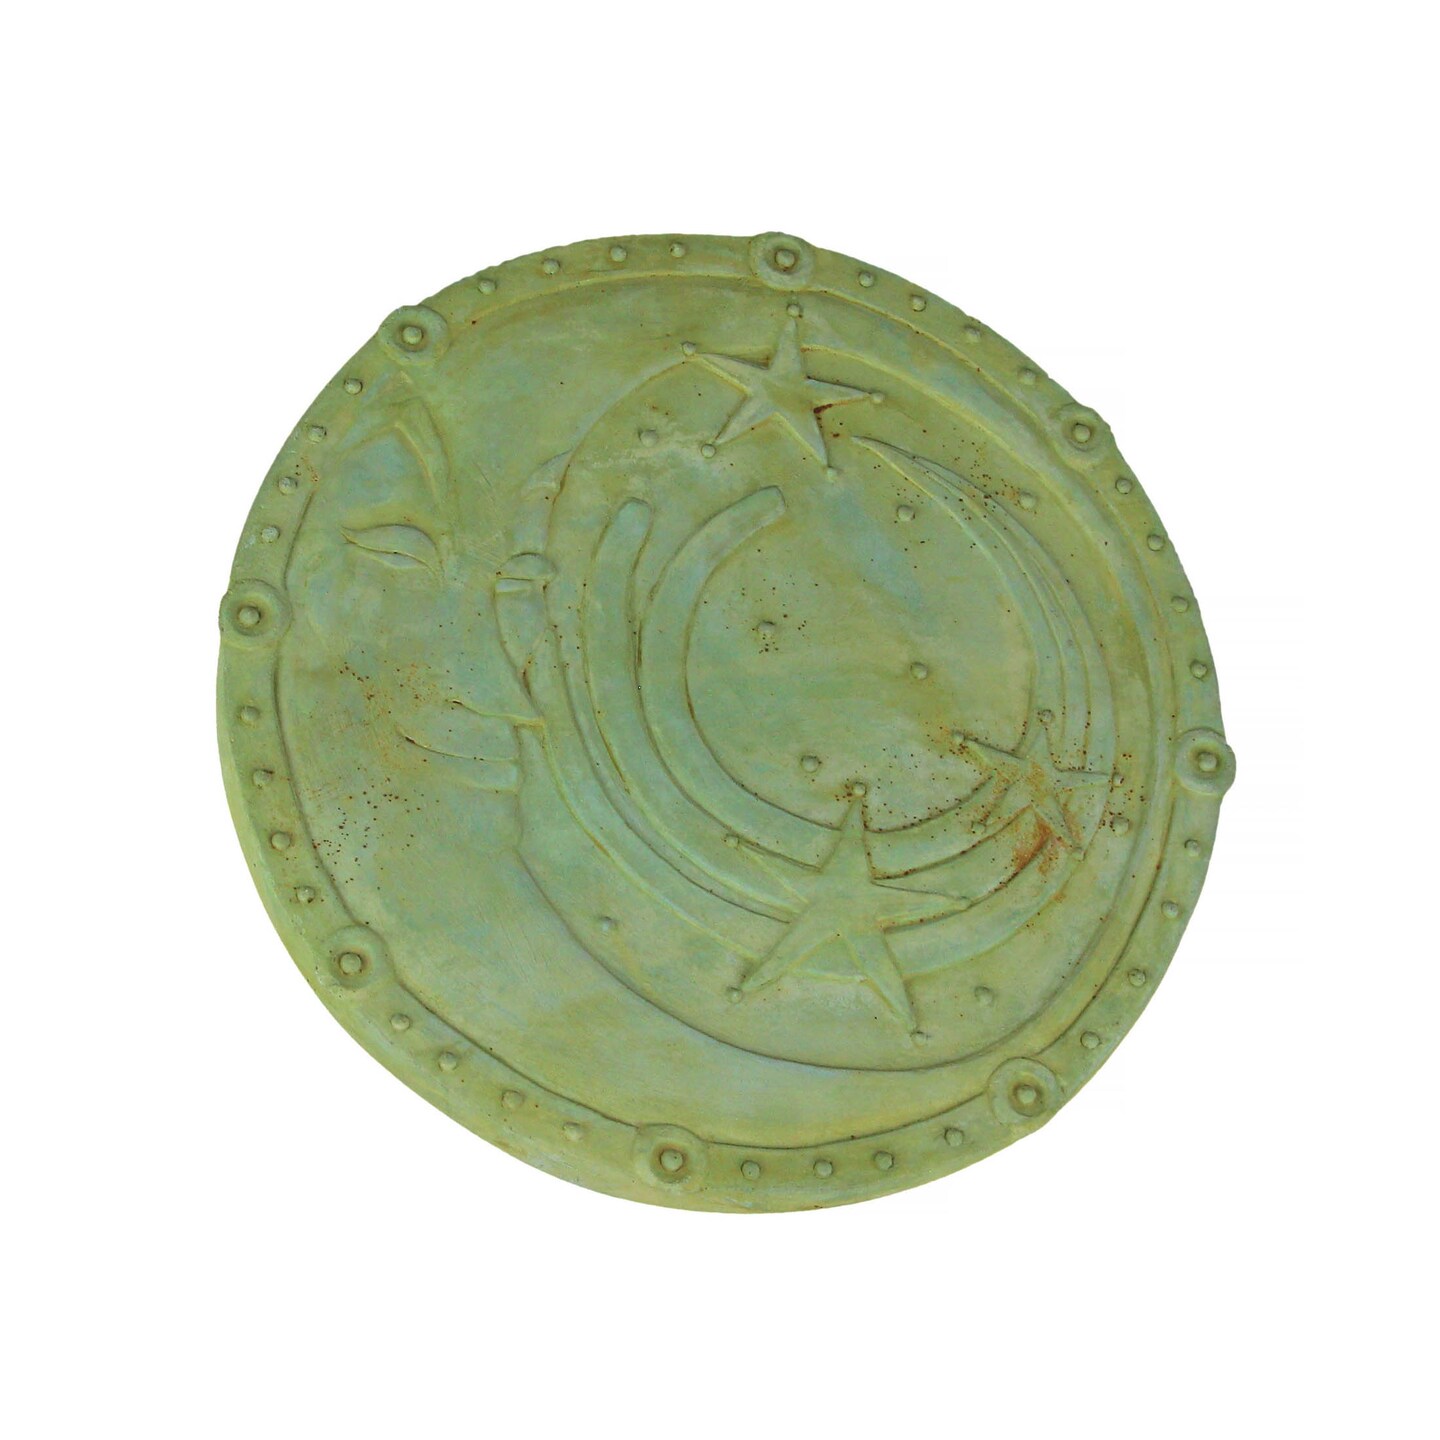 Celestial Moon and Stars Design Verdigris Finish Round Cement Step Stone 10 Inch